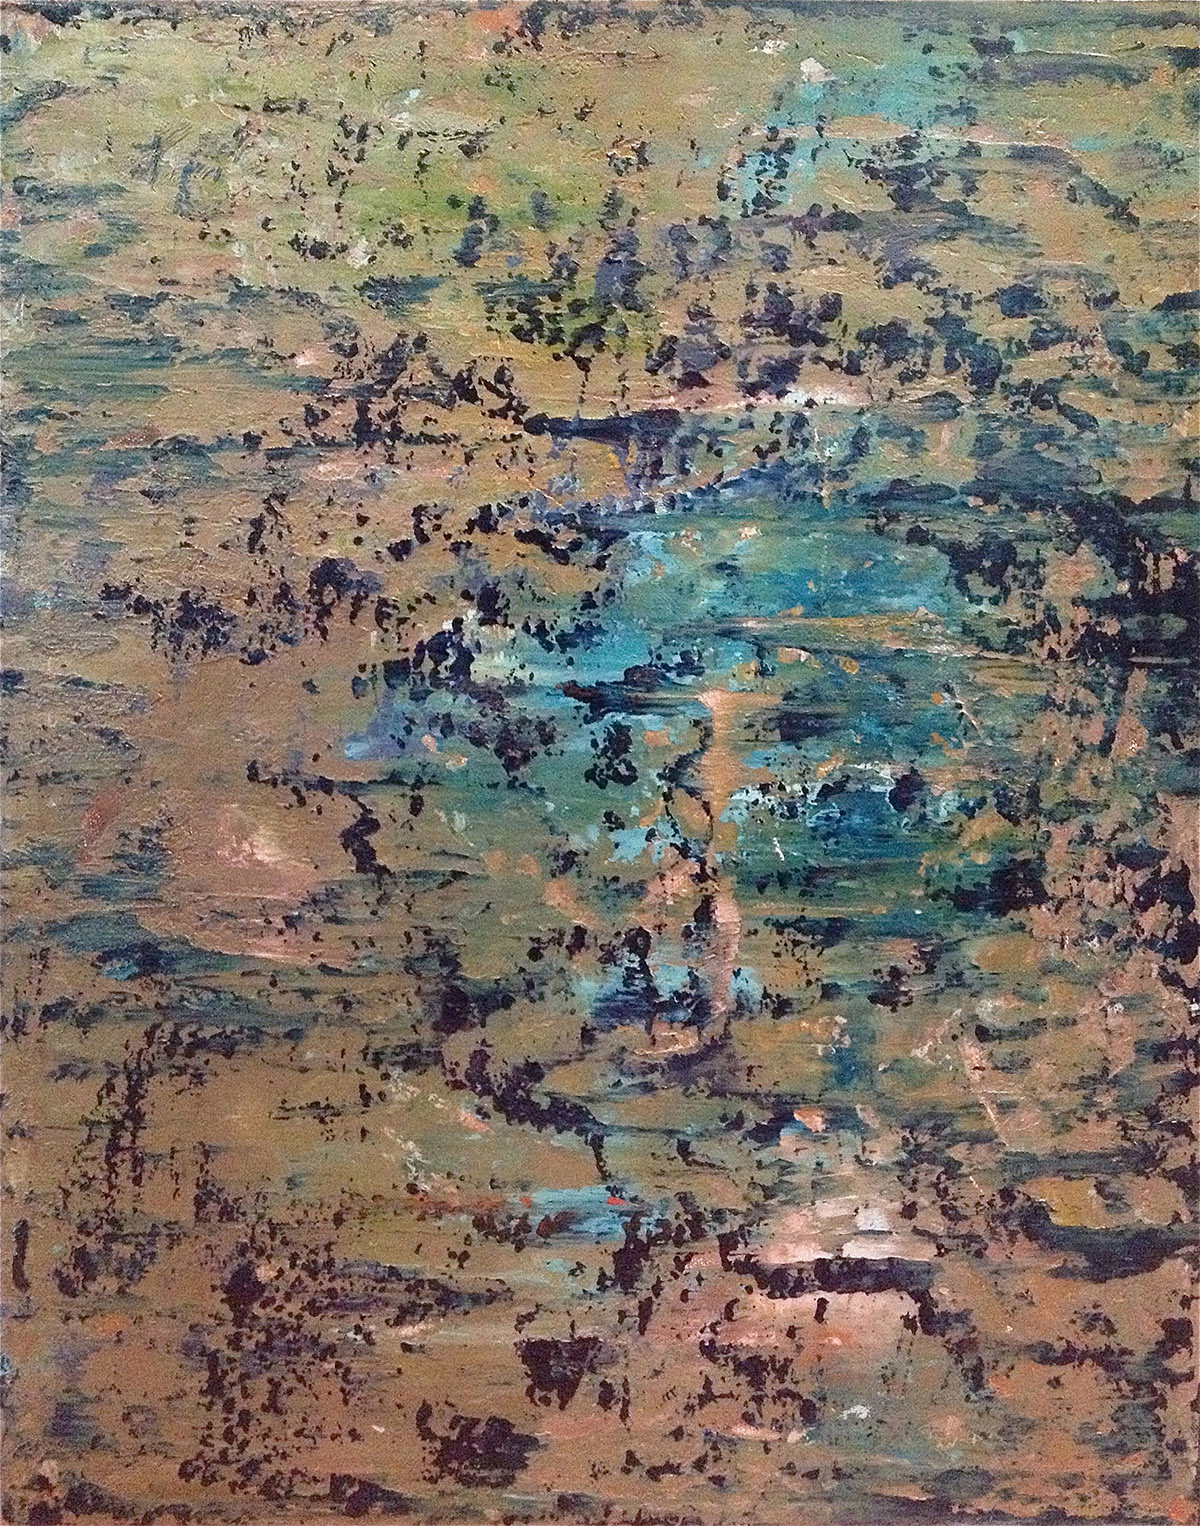 Blue Reflections, 2013